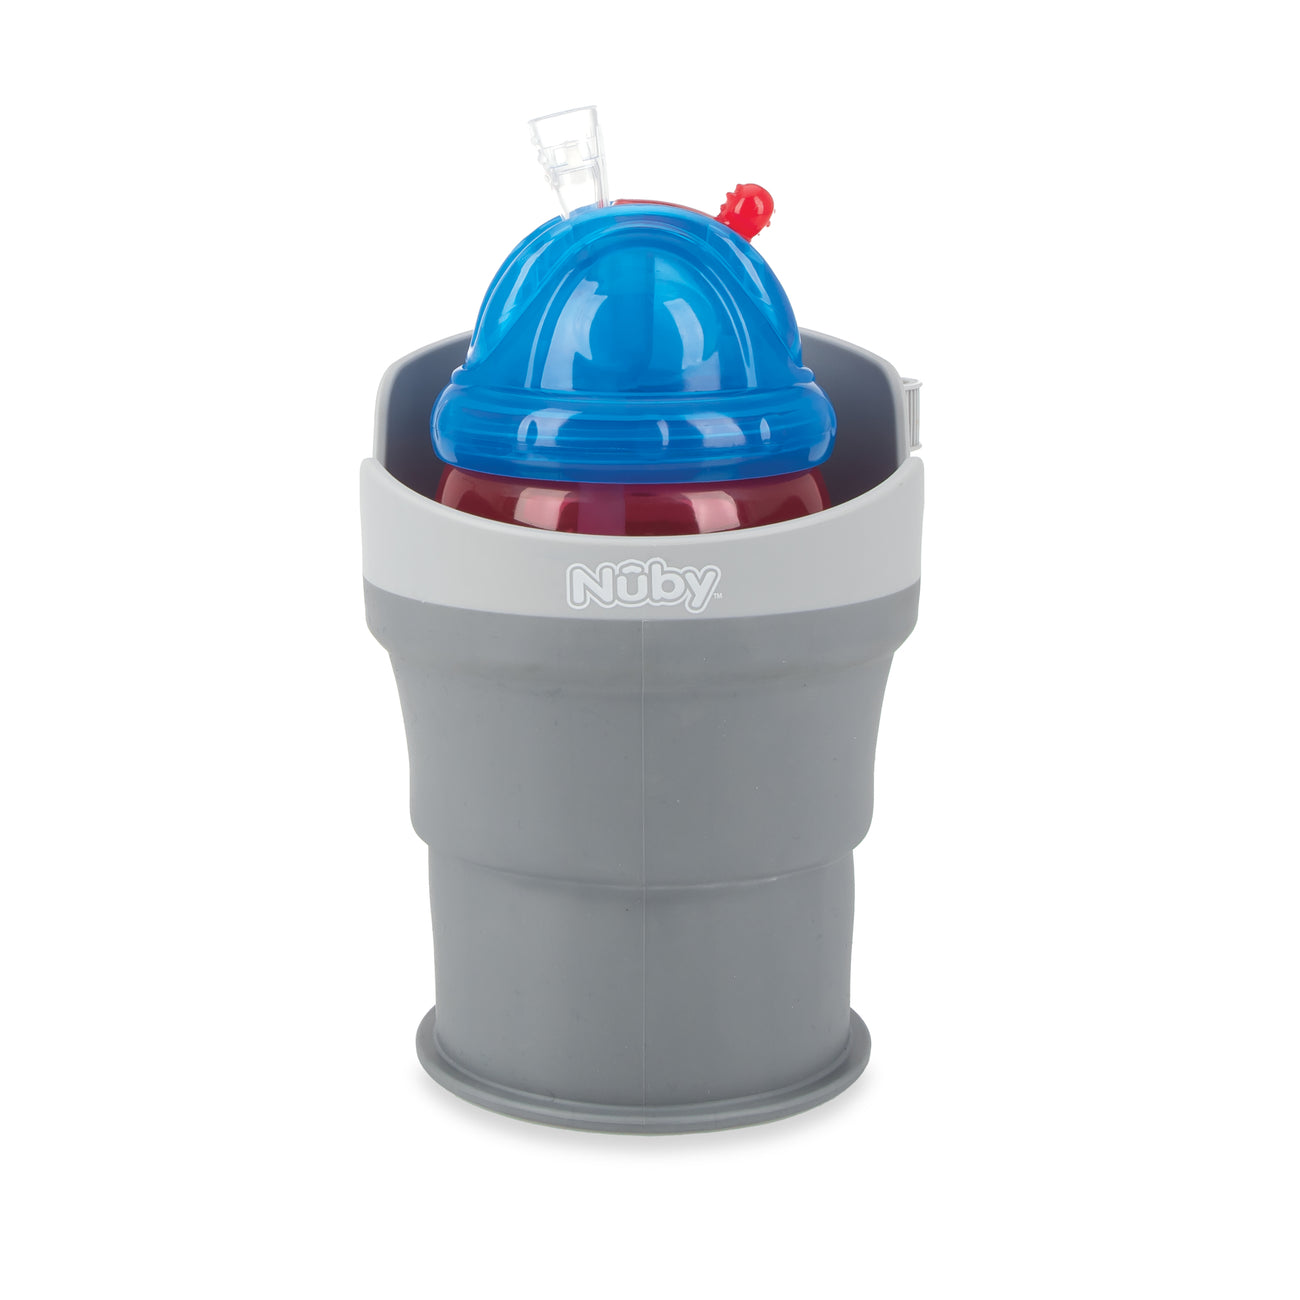 Collapsible Cup Holder - Nuby US